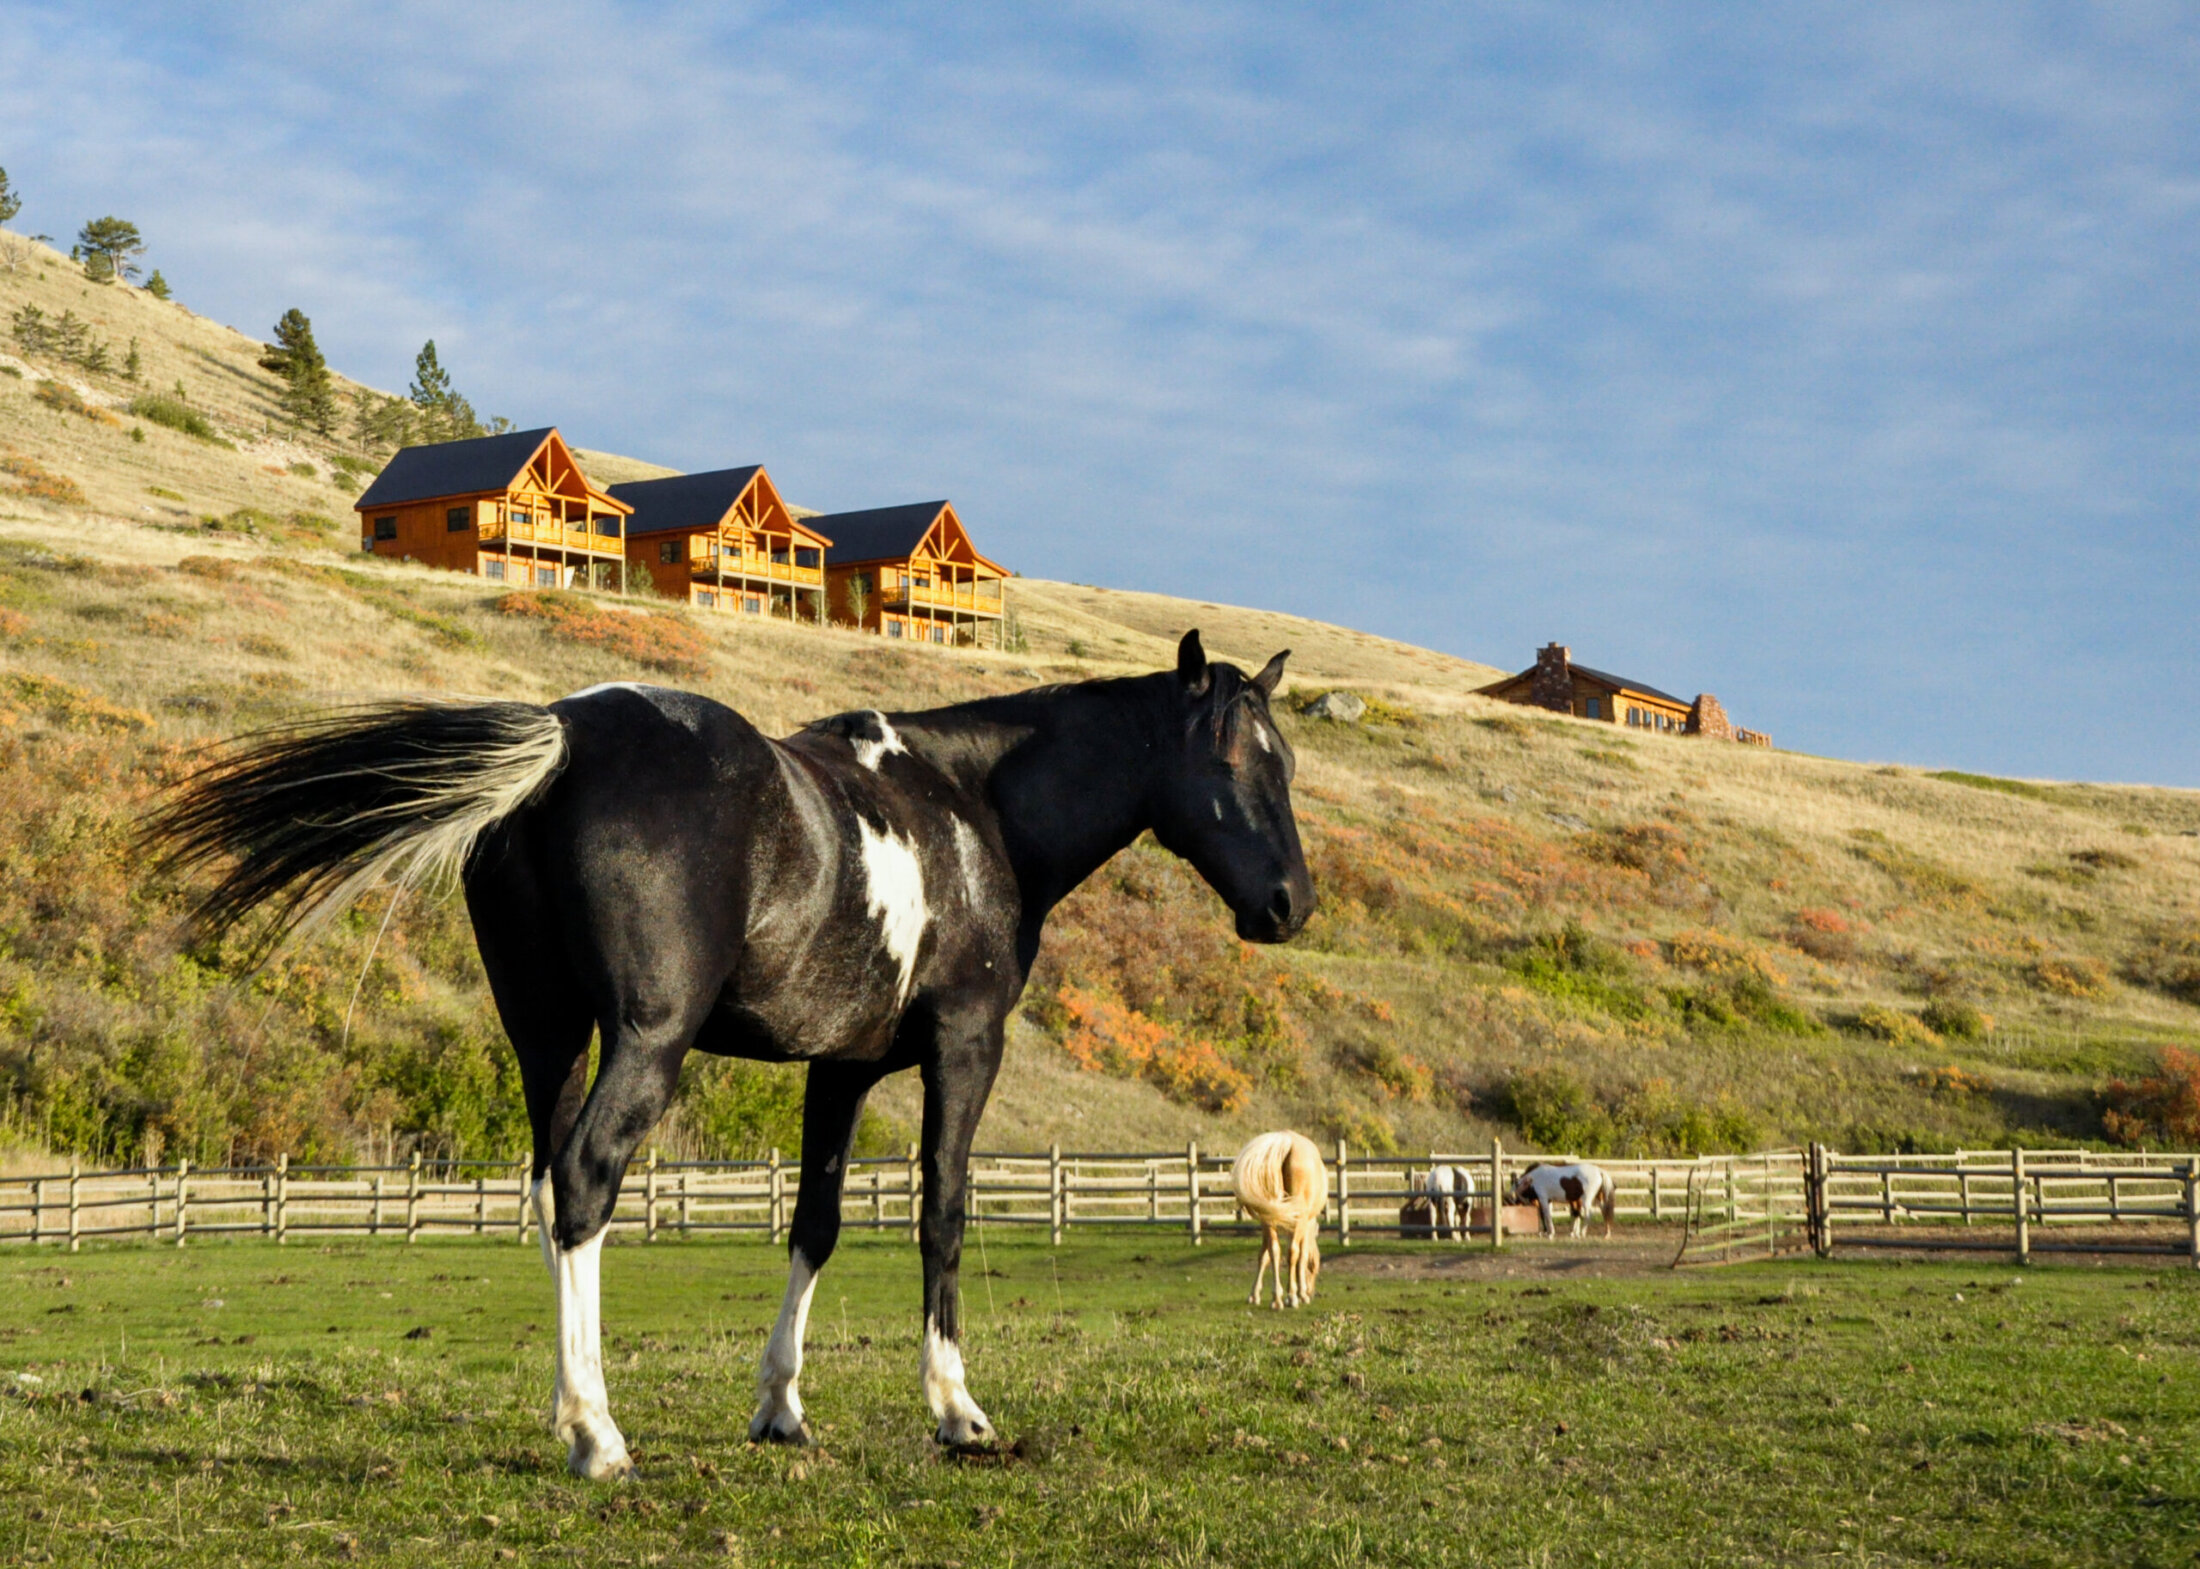 Horses and Cabins